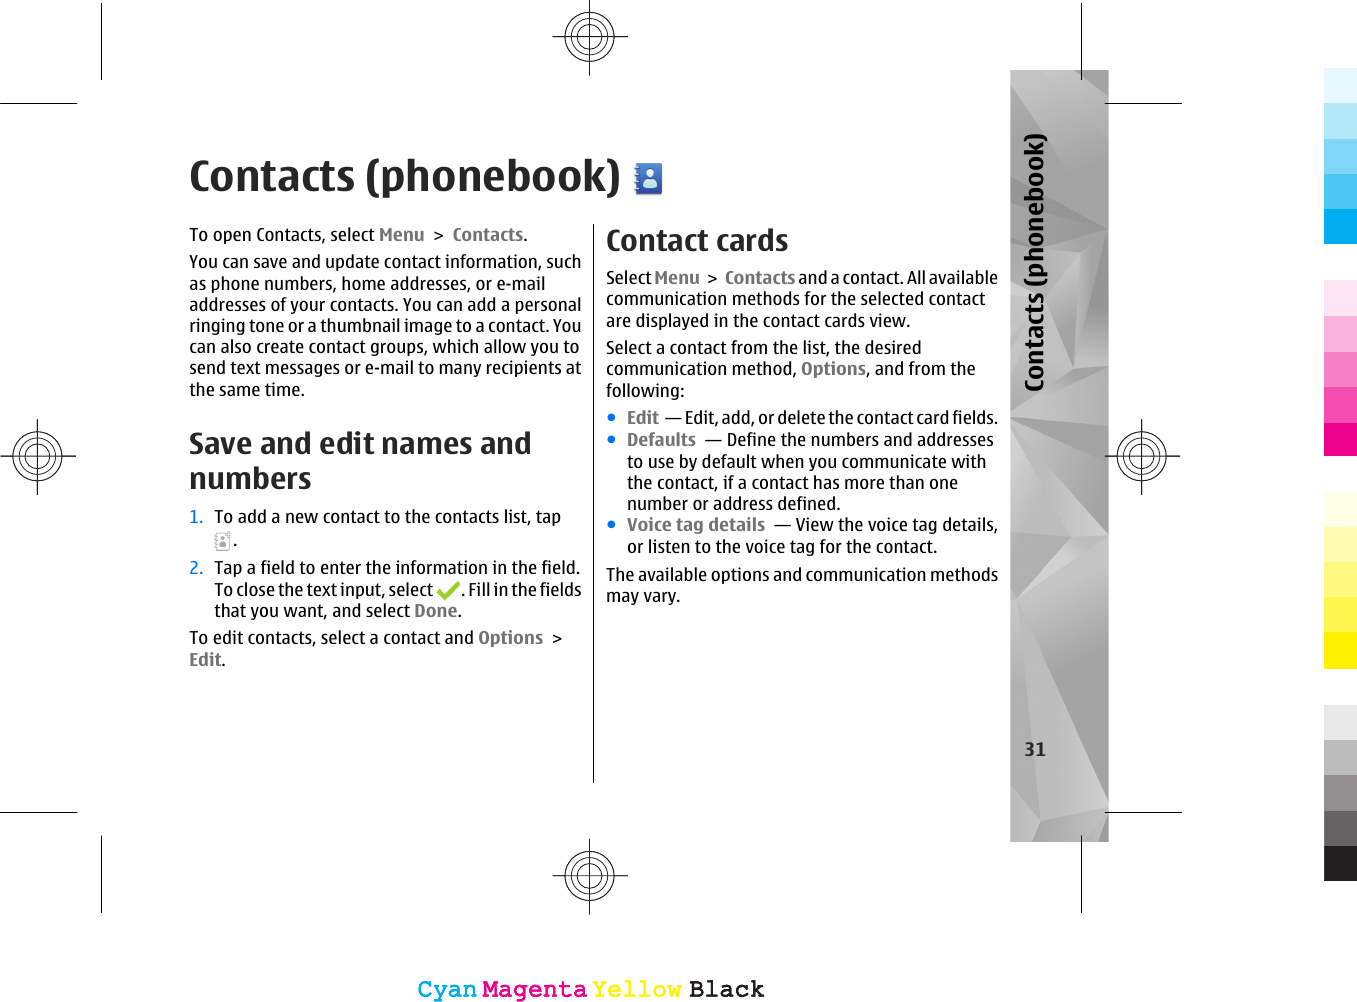 Contacts (phonebook)To open Contacts, select Menu &gt; Contacts.You can save and update contact information, suchas phone numbers, home addresses, or e-mailaddresses of your contacts. You can add a personalringing tone or a thumbnail image to a contact. Youcan also create contact groups, which allow you tosend text messages or e-mail to many recipients atthe same time.Save and edit names andnumbers1. To add a new contact to the contacts list, tap.2. Tap a field to enter the information in the field.To close the text input, select  . Fill in the fieldsthat you want, and select Done.To edit contacts, select a contact and Options &gt;Edit.Contact cardsSelect Menu &gt; Contacts and a contact. All availablecommunication methods for the selected contactare displayed in the contact cards view.Select a contact from the list, the desiredcommunication method, Options, and from thefollowing:●Edit  — Edit, add, or delete the contact card fields.●Defaults  — Define the numbers and addressesto use by default when you communicate withthe contact, if a contact has more than onenumber or address defined.●Voice tag details  — View the voice tag details,or listen to the voice tag for the contact.The available options and communication methodsmay vary.31Contacts (phonebook)CyanCyanMagentaMagentaYellowYellowBlackBlackCyanCyanMagentaMagentaYellowYellowBlackBlack